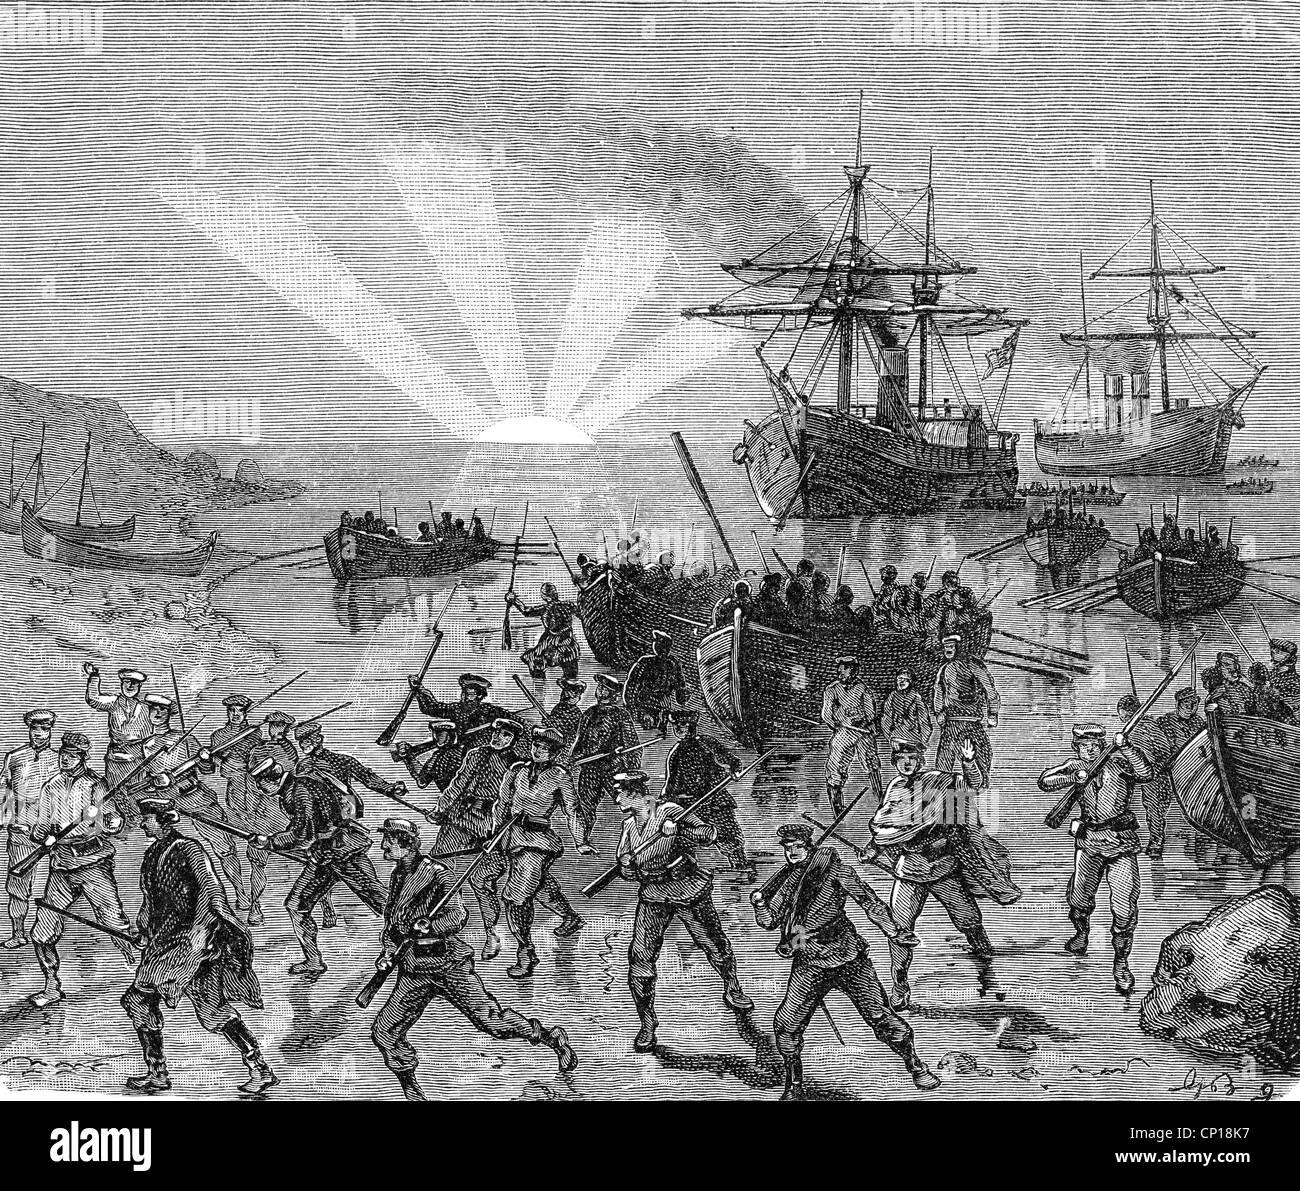 events, 'Expedition of the Thousand', 1860, landing of Giuseppe Garibaldi and his troops at Marsala, Sicily, 11.5.1860, wood engraving after drawing by Bropling, 19th century, , Additional-Rights-Clearences-Not Available Stock Photo